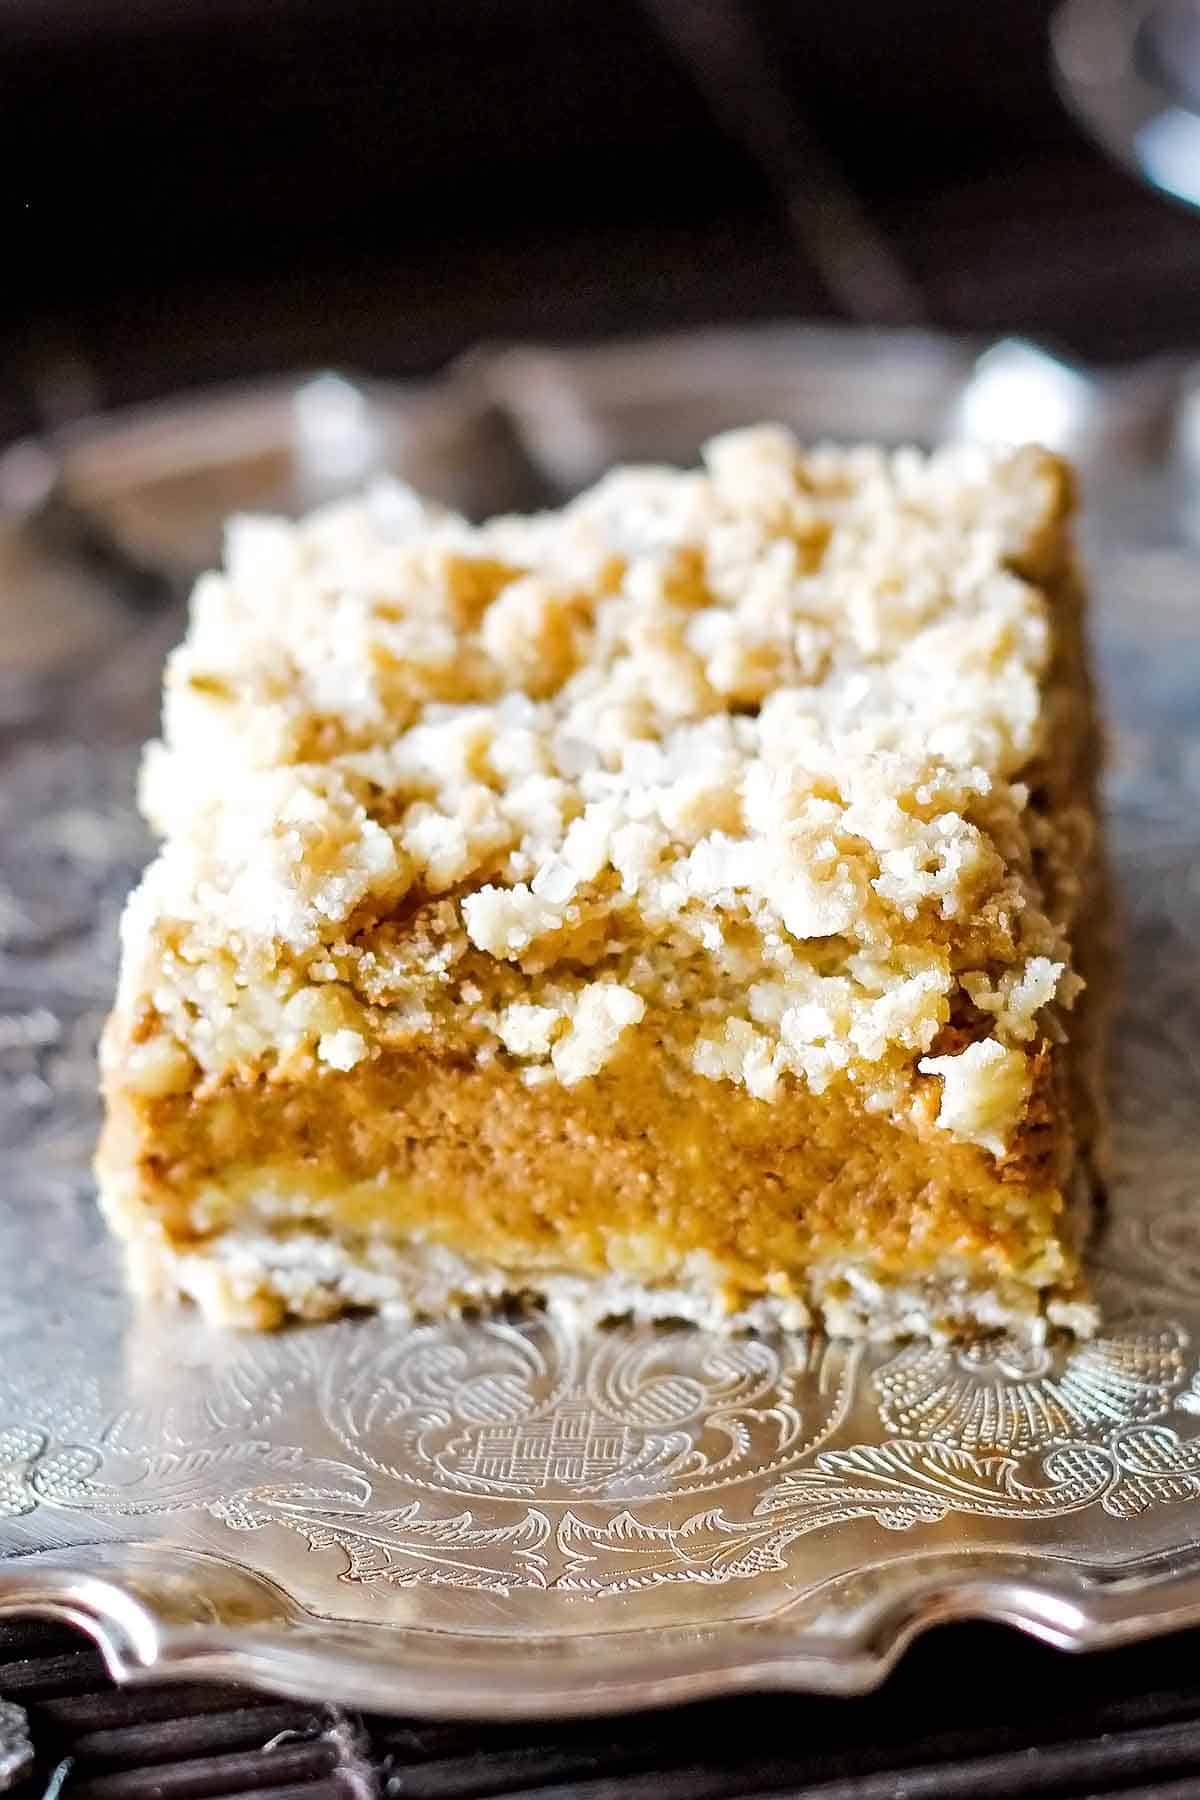 pumpkin bar with crust and crumb topping on silver platter